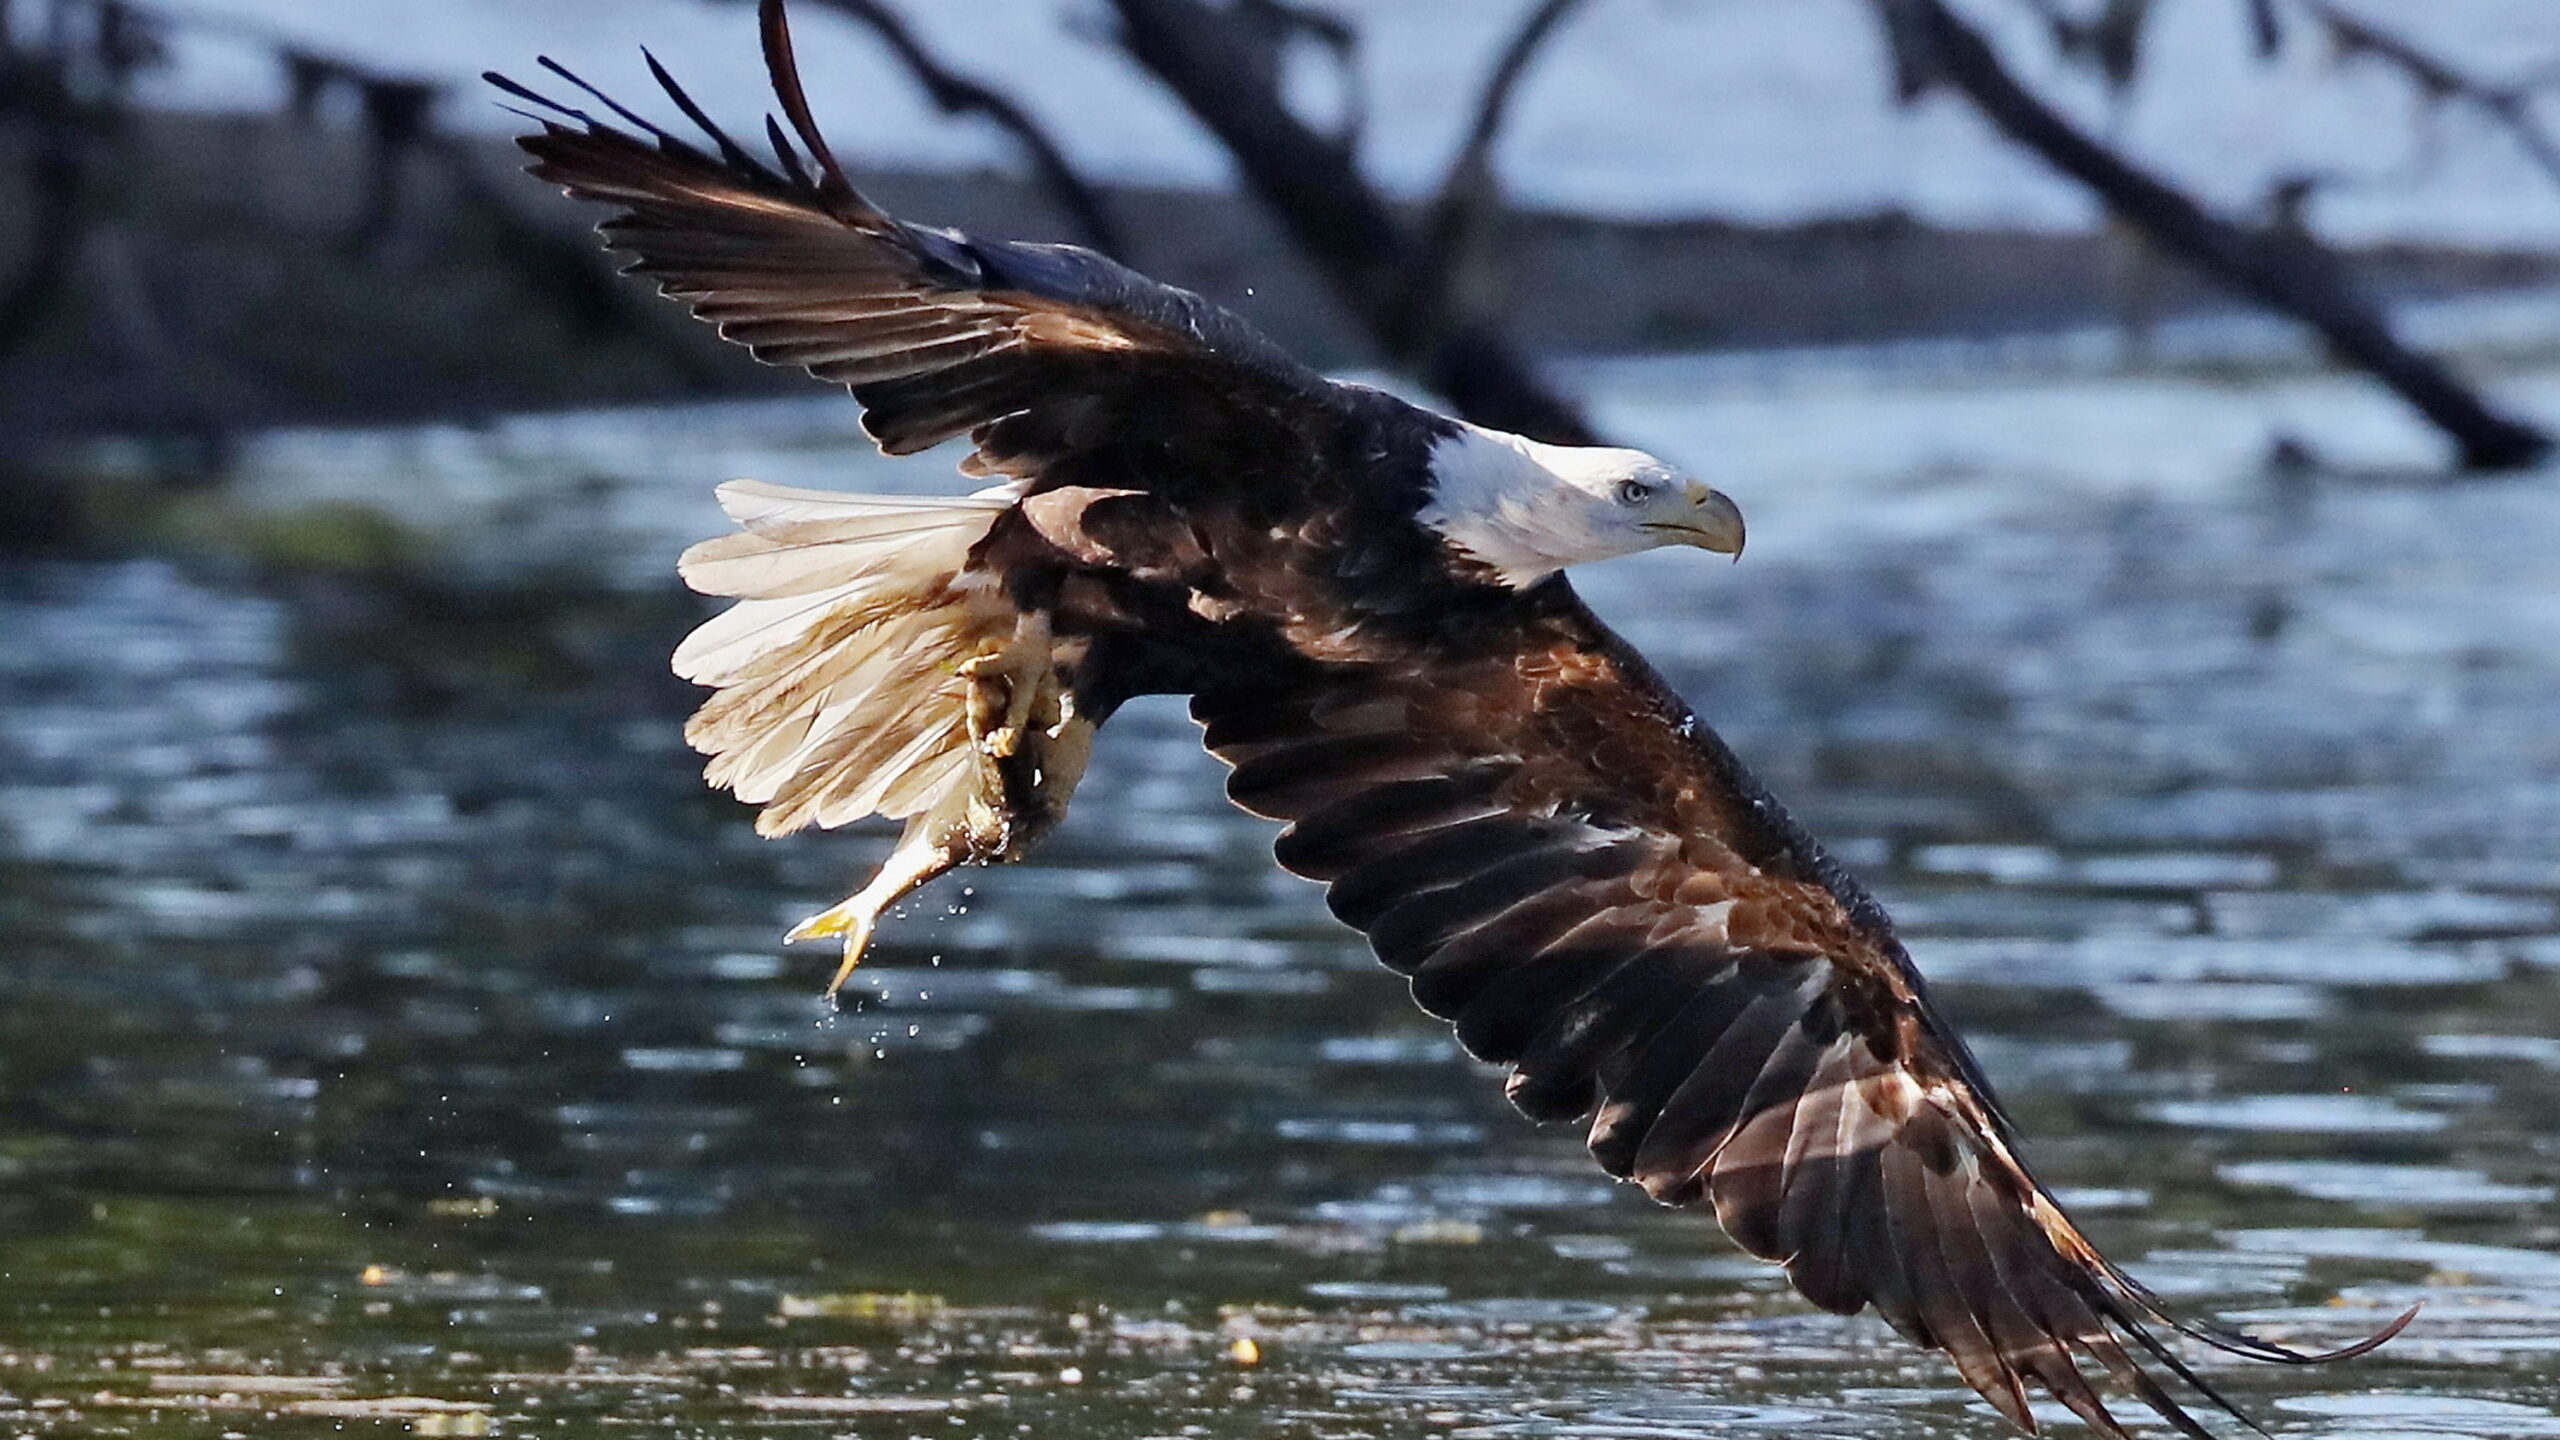 Two men charged with killing approximately 3,600 birds, including bald eagles